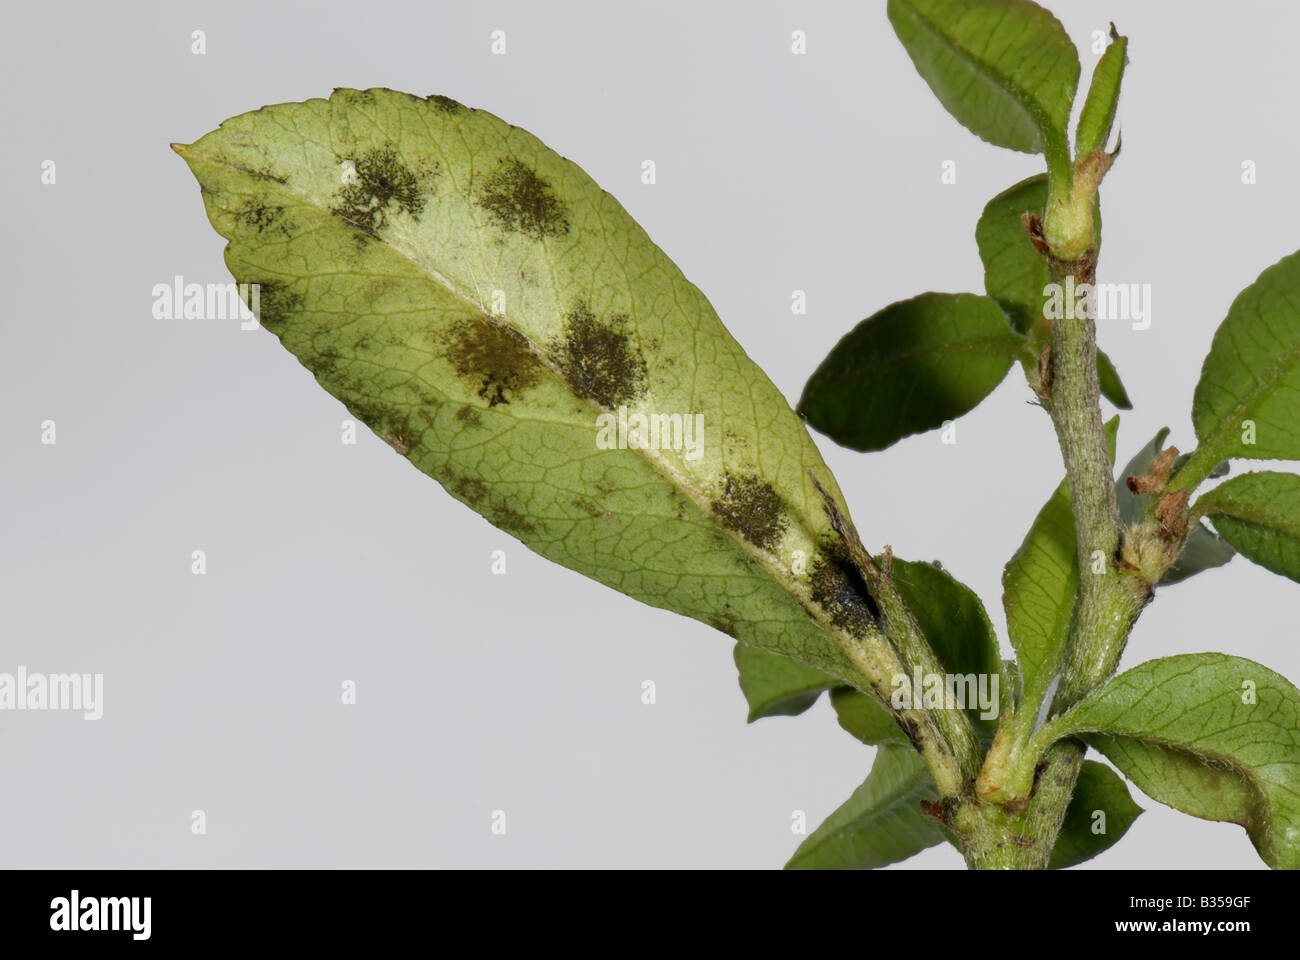 Scab Venturia inaequalis development of disease on the underside of a Pyracantha leaf Stock Photo